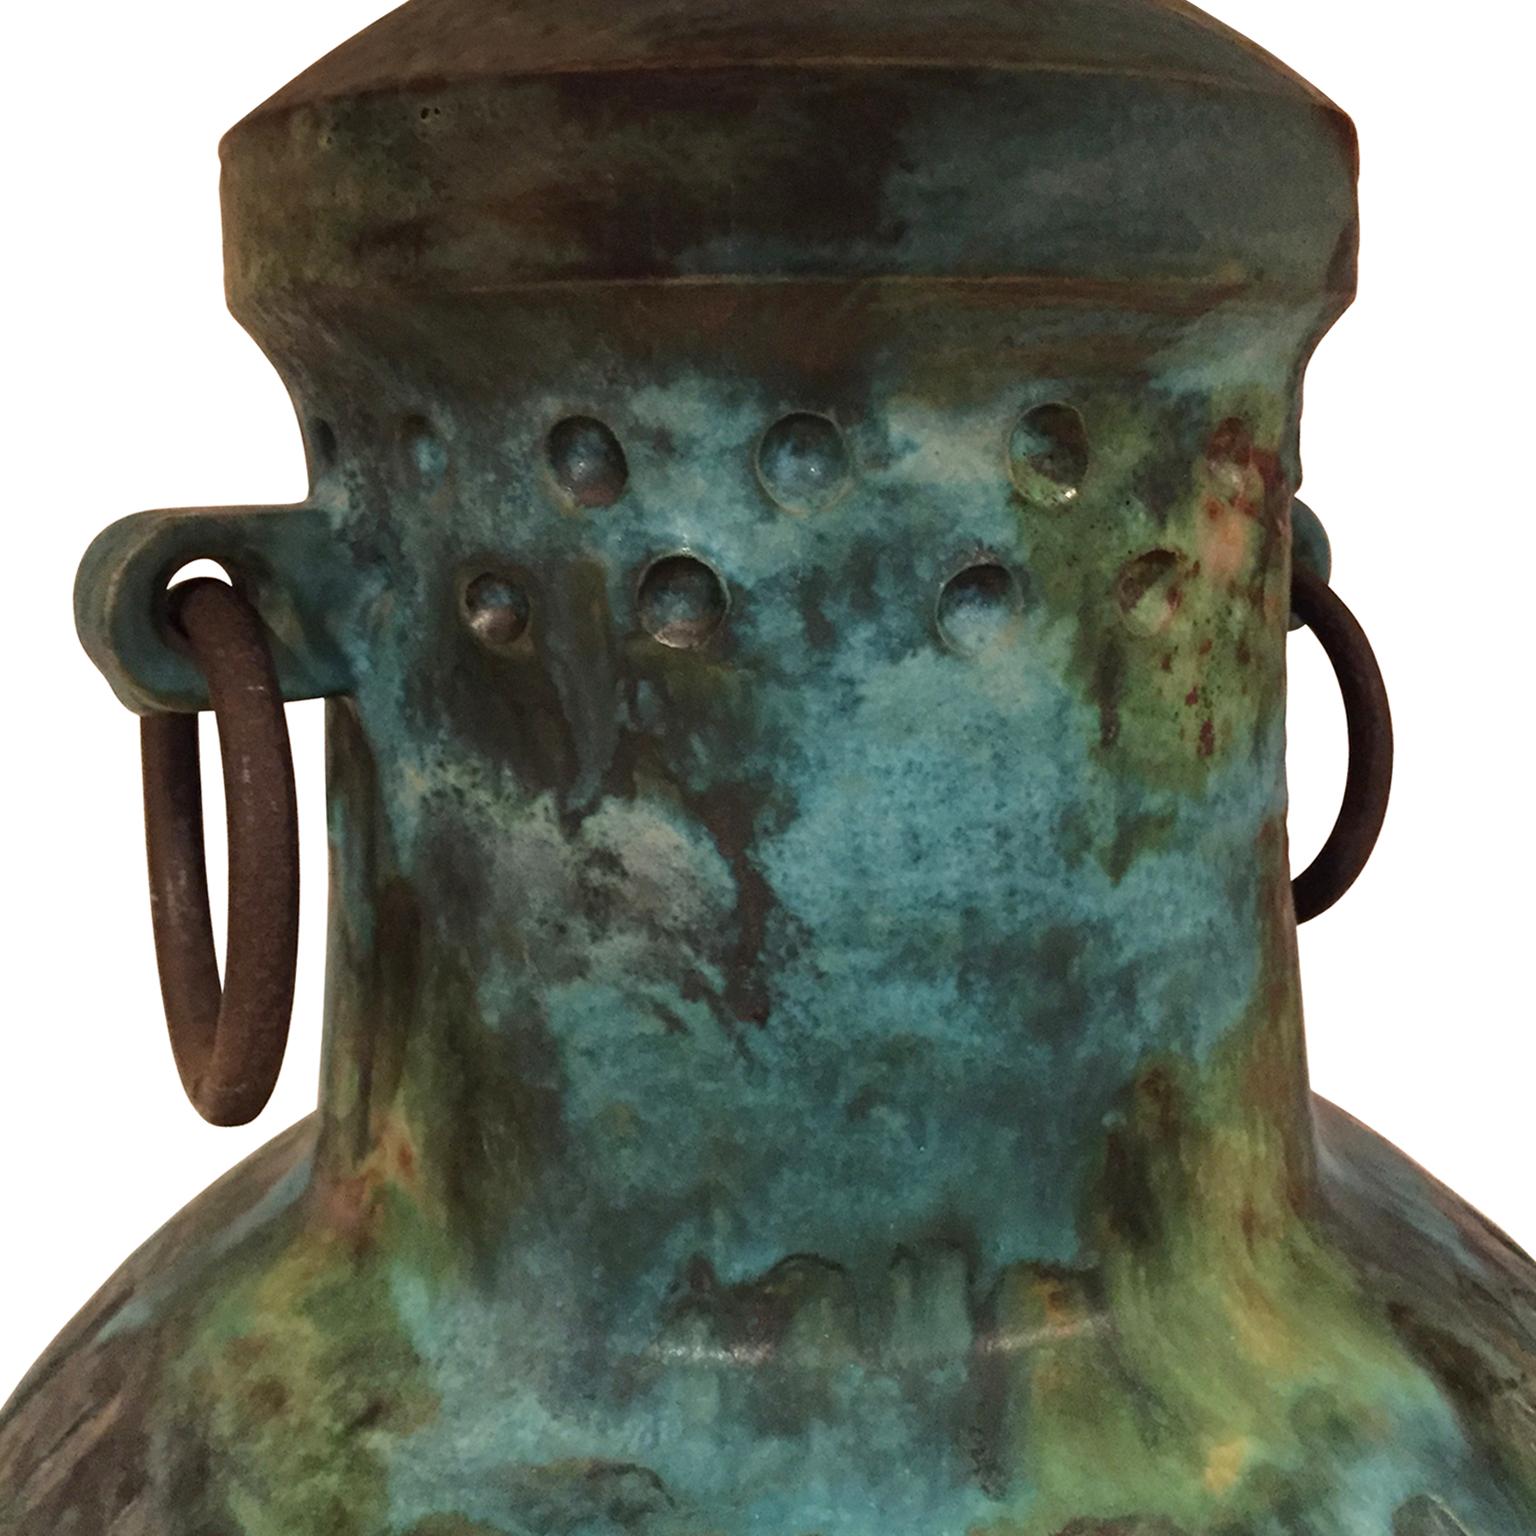 Alvino Bagni for Raymor ceramic jar lamp with handles and iron rings in blue green glaze, Italy, 1960s.